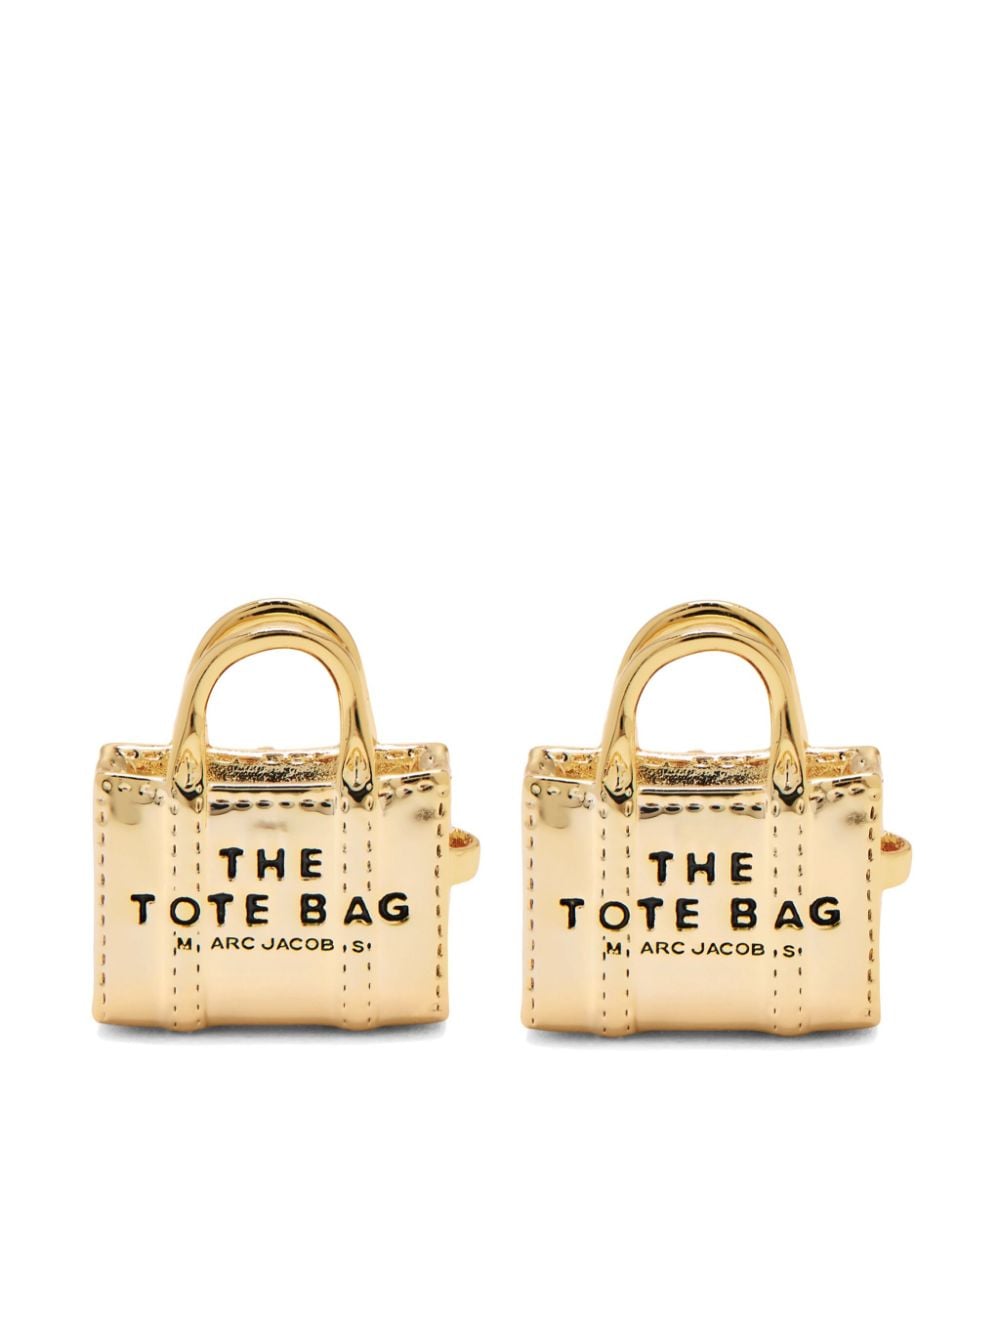 Marc Jacobs Tote Bag stud earrings - Gold von Marc Jacobs